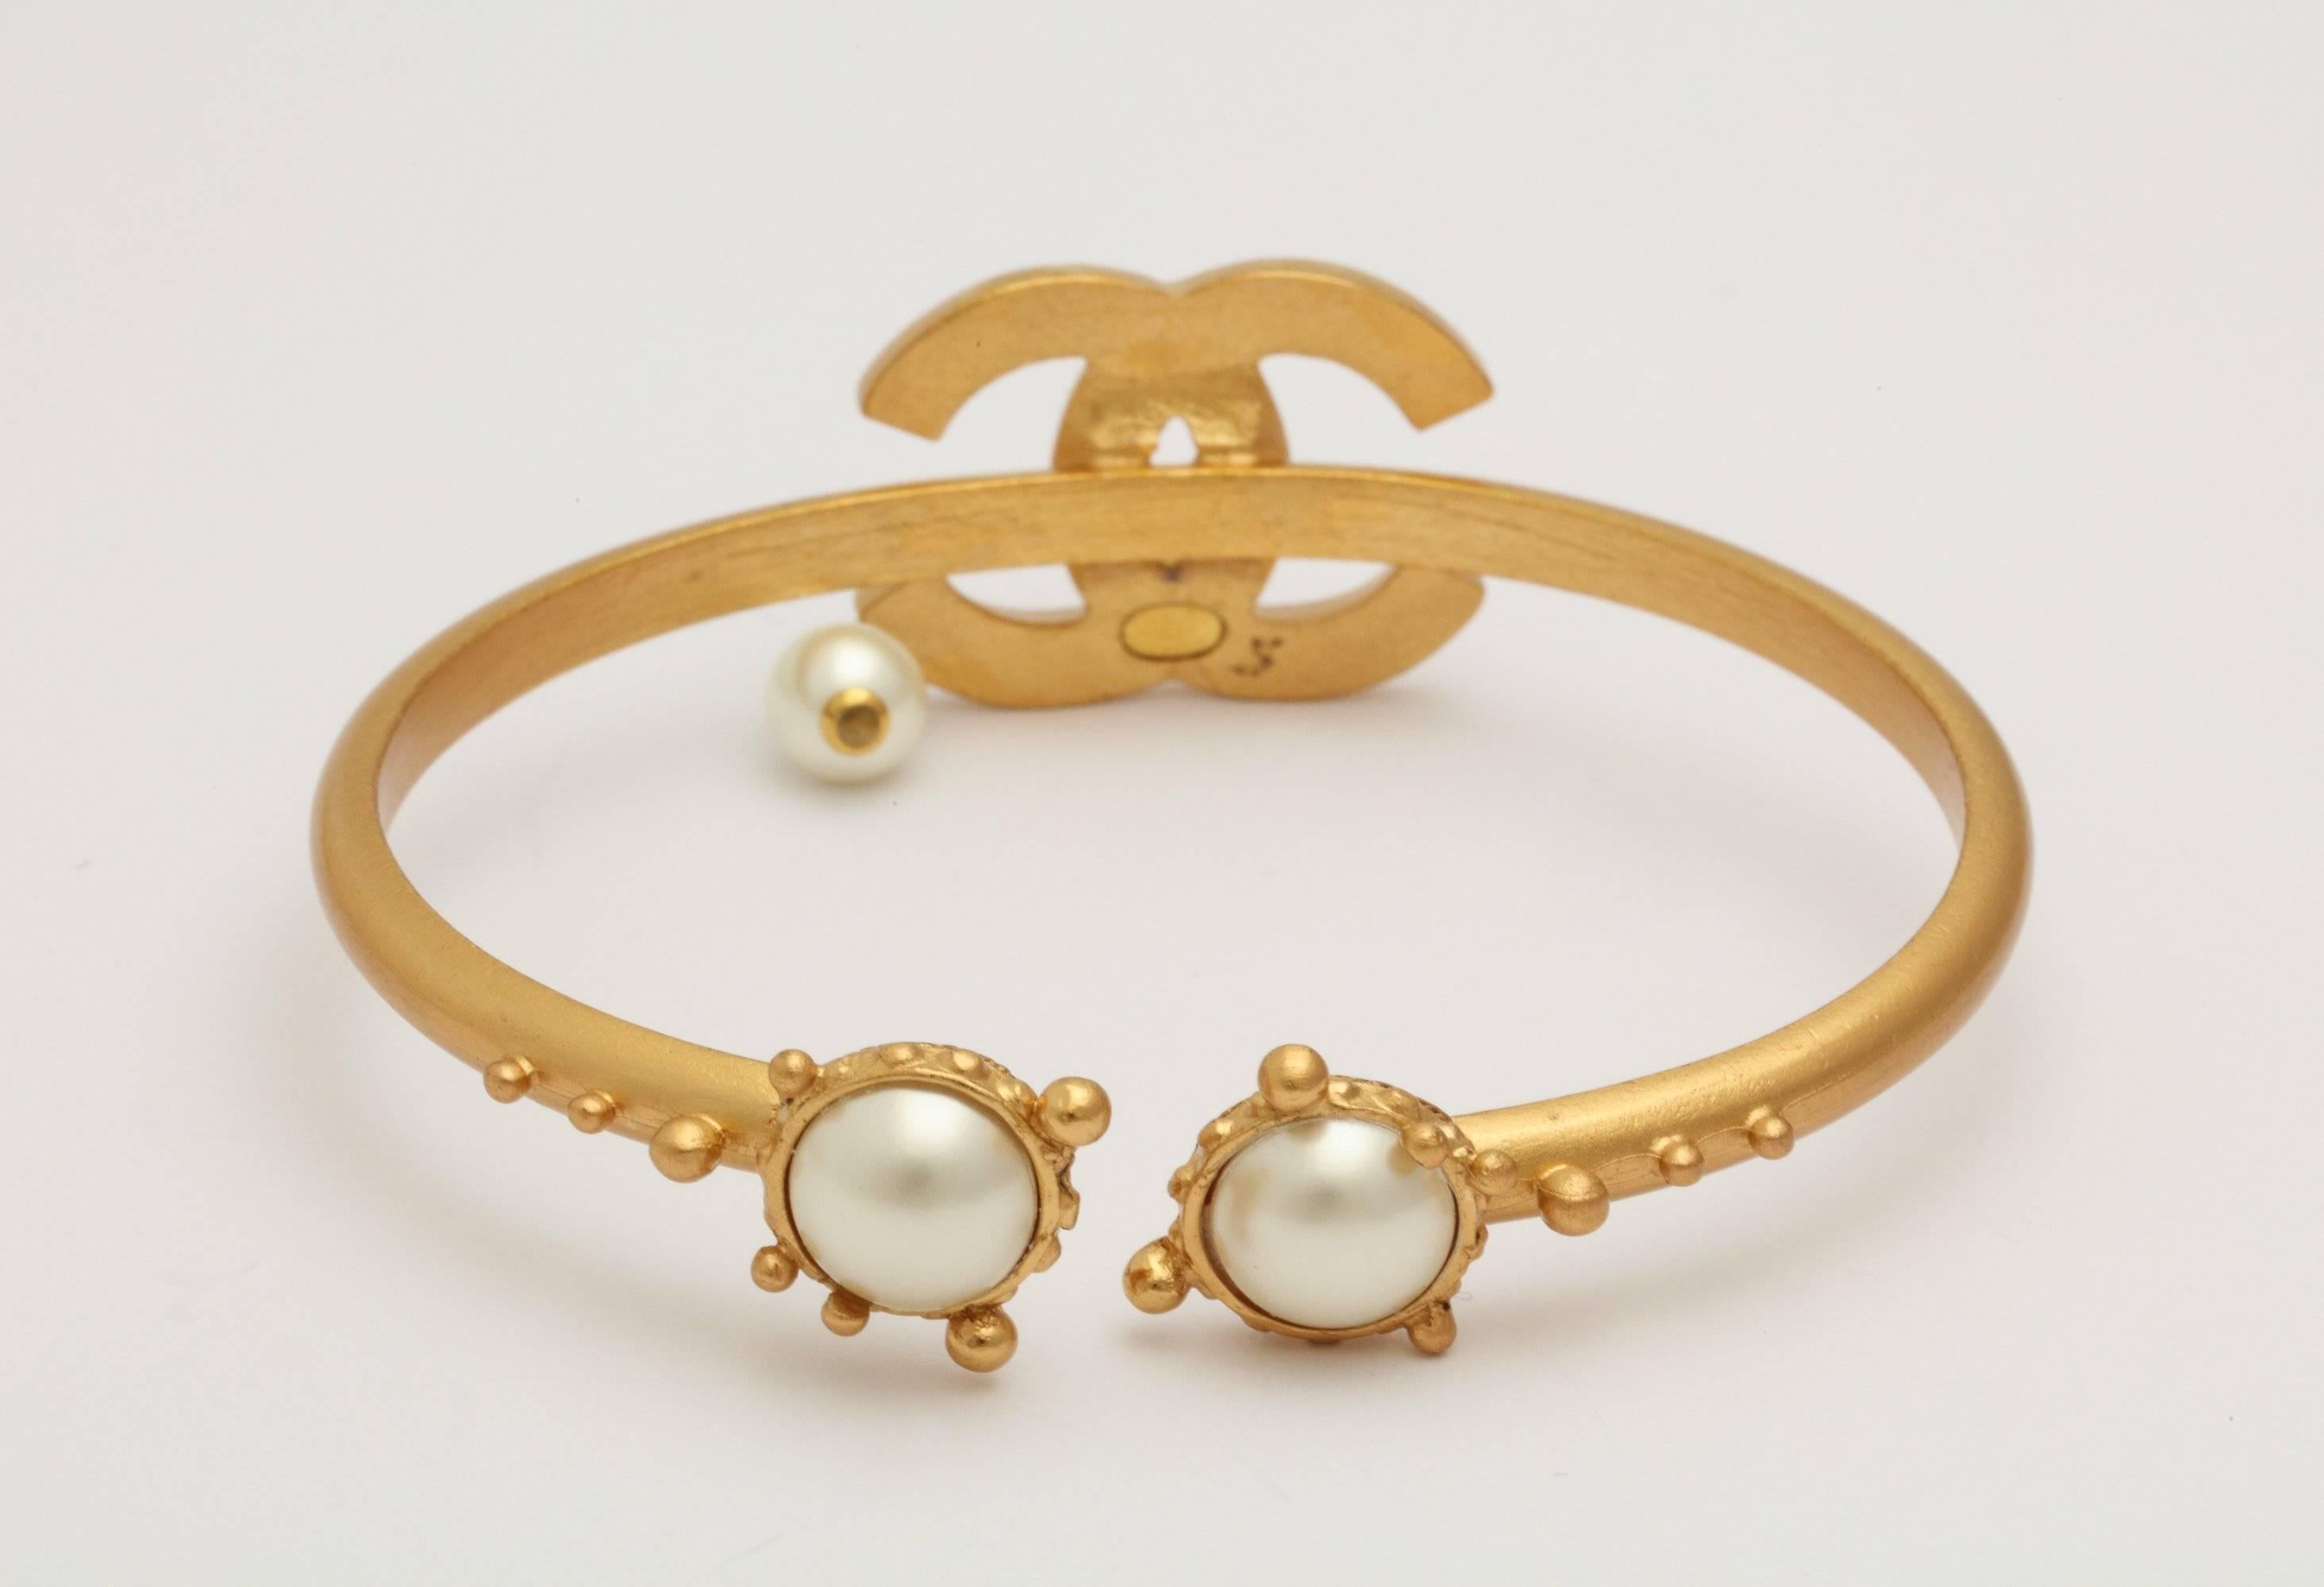 A rare vintage Chanel bangle with CC encrusted opaline crystals and a 
dangling pearl .  The underside  has the CC logo with a pearl surrounded by
etruscan style bead work. This is adjustable for most wrist sizes.
